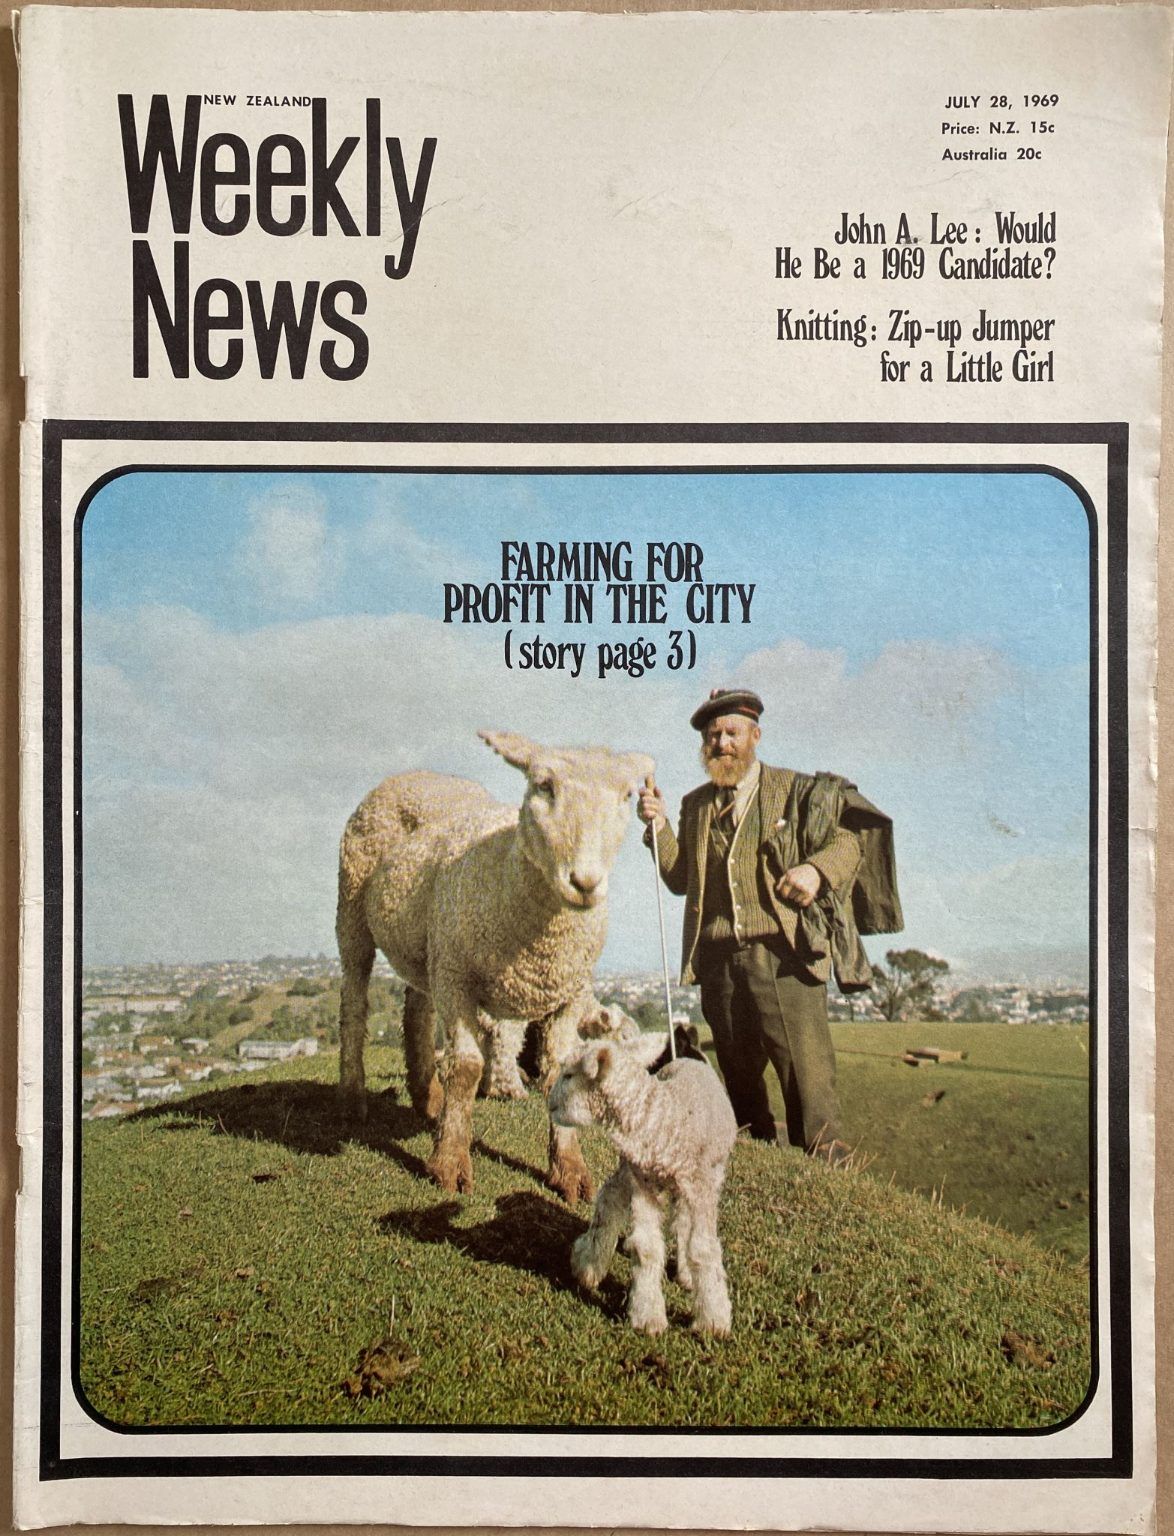 OLD NEWSPAPER: New Zealand Weekly News, No. 5513, 28 July 1969